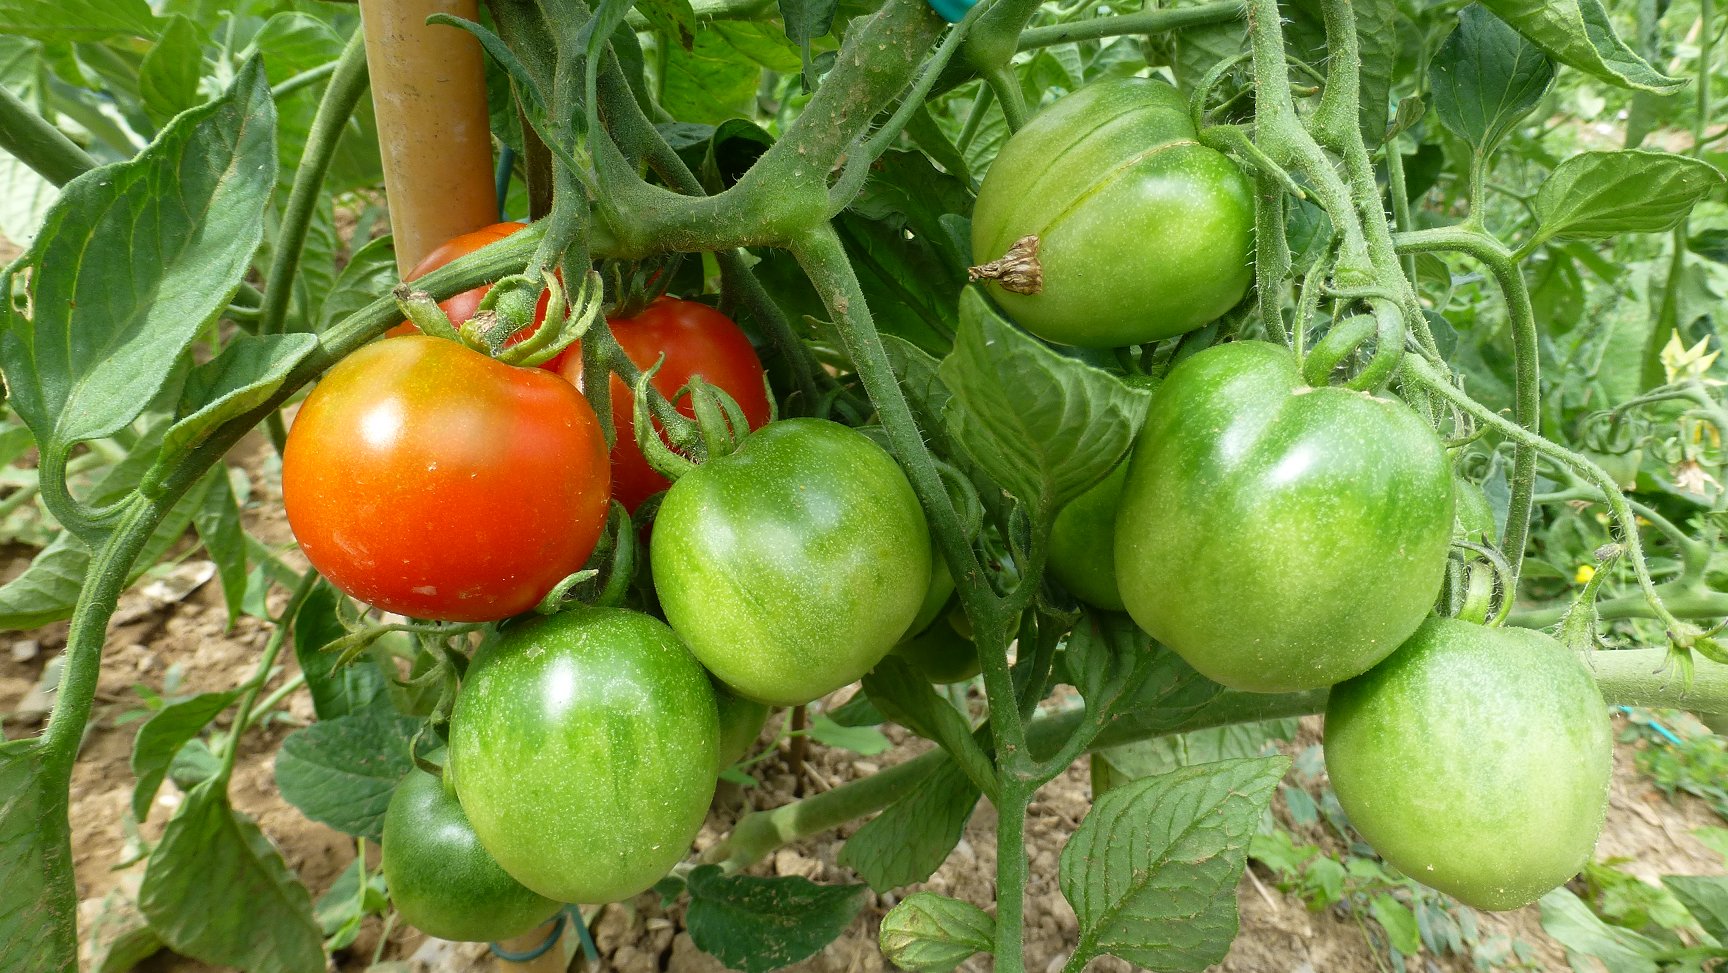 Tomatoes repening on the vine